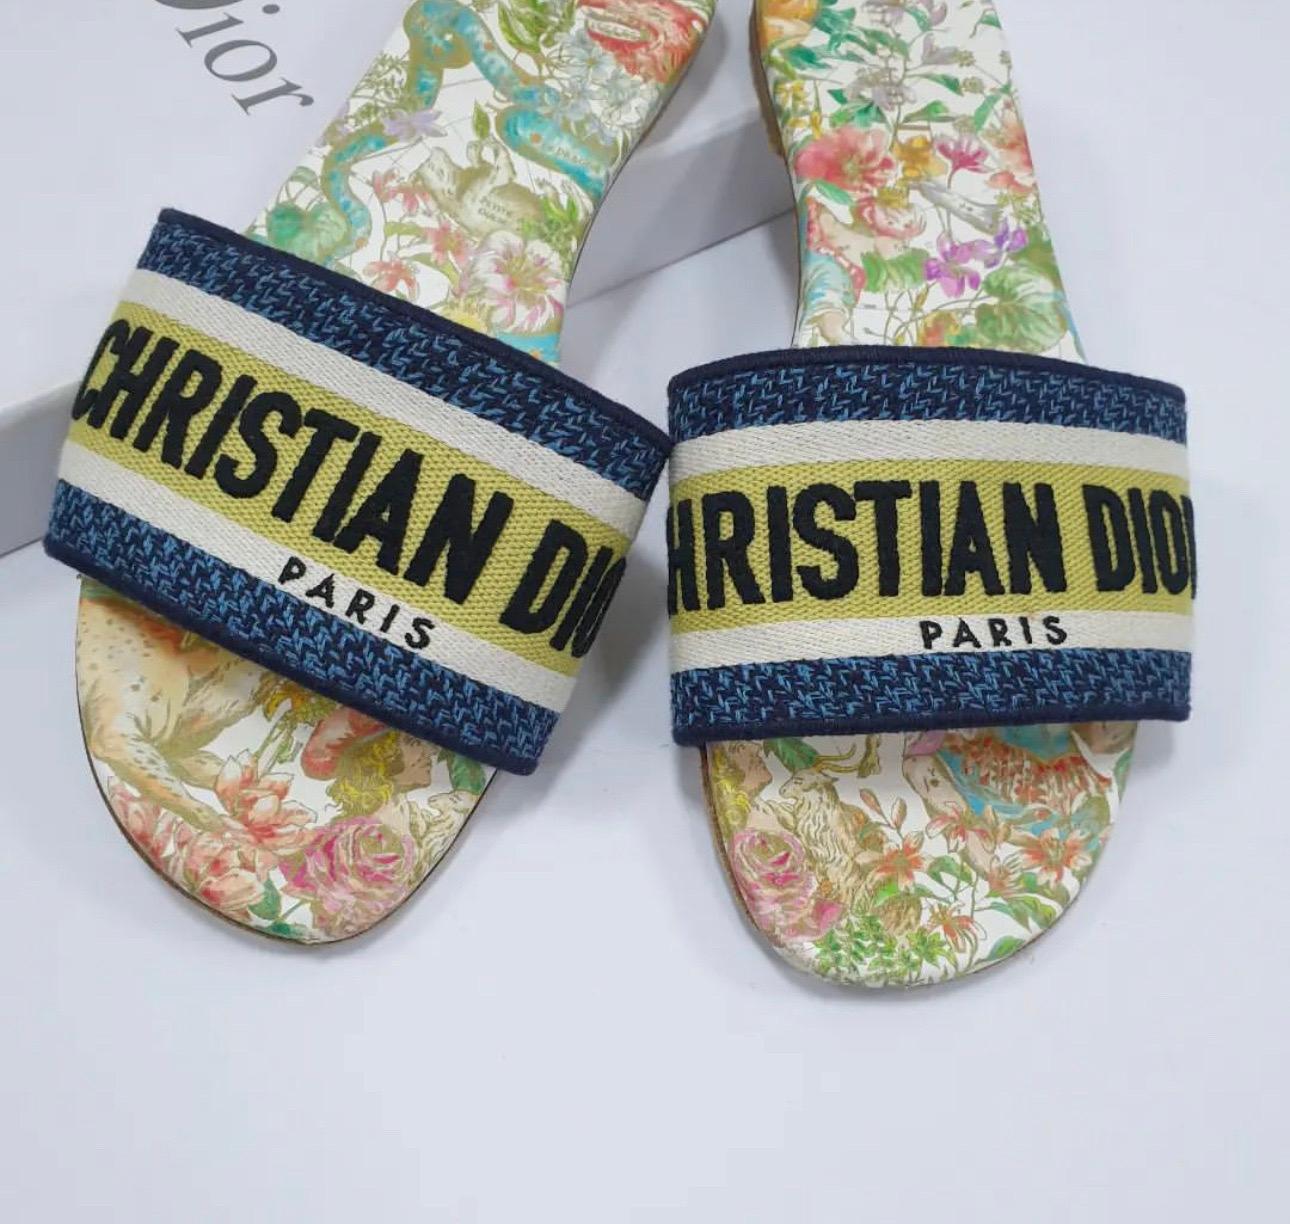 DIOR Dway Embroidered Cotton Slides Mules Sandals
Multicolored from the zodiac collection
Sz. 37.5
No box. No dust bag